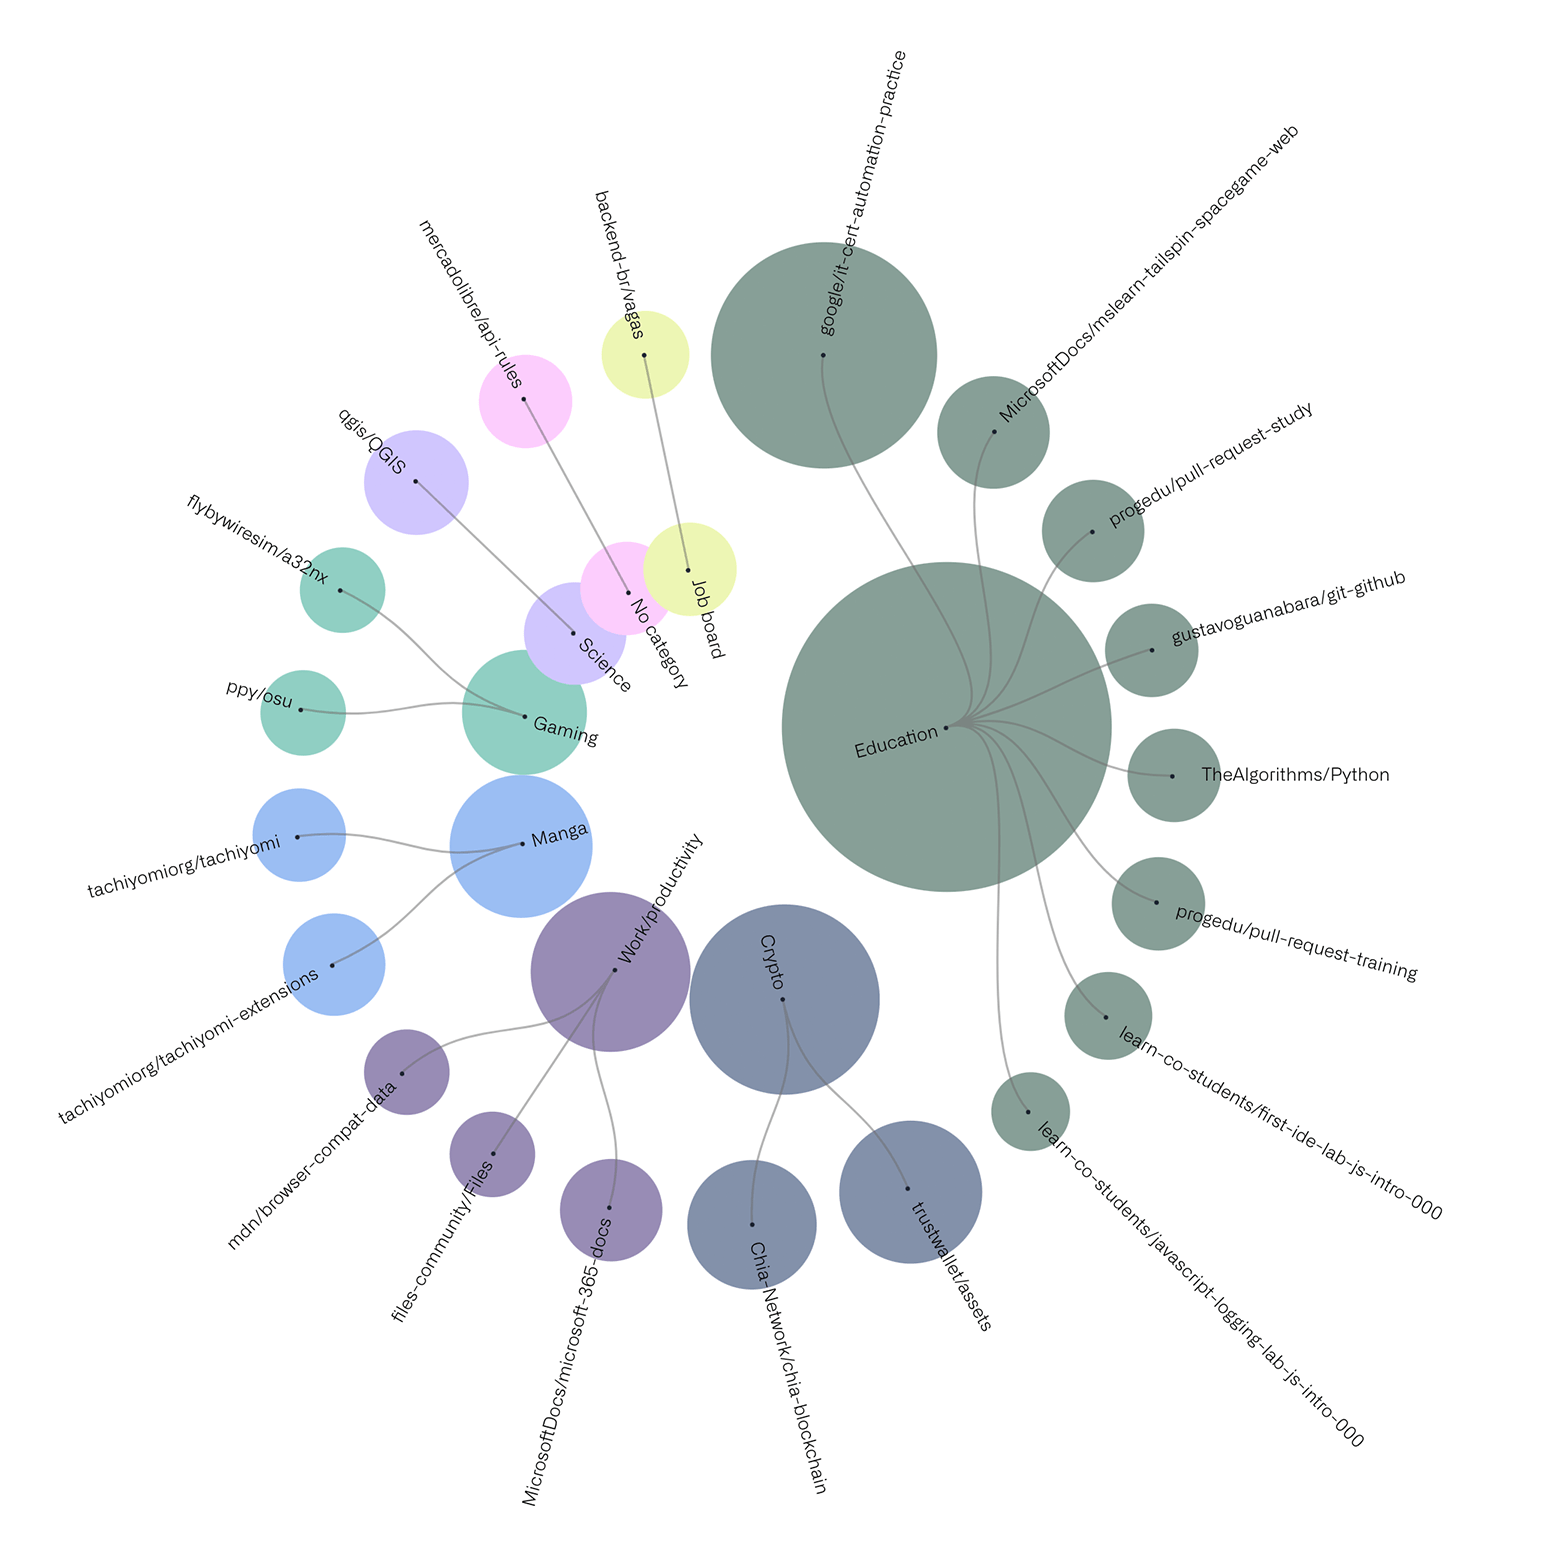 A circular dendrogram for GitHub's Octoverse report. Each circle represents one of the 20 largest repositories by category and repository contributors. Each sector is represented by a different color.